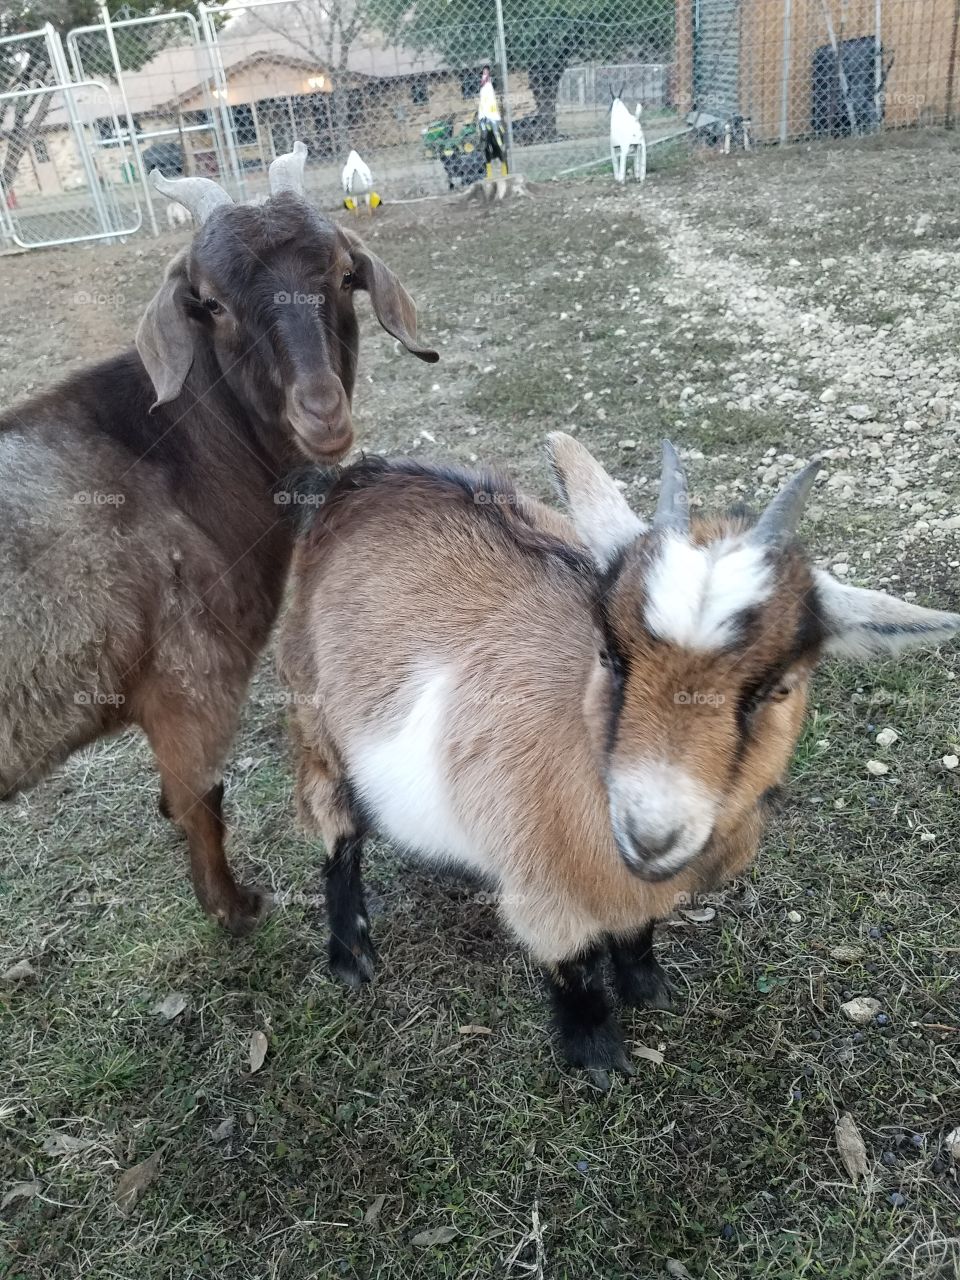 These lady goats really love the camera